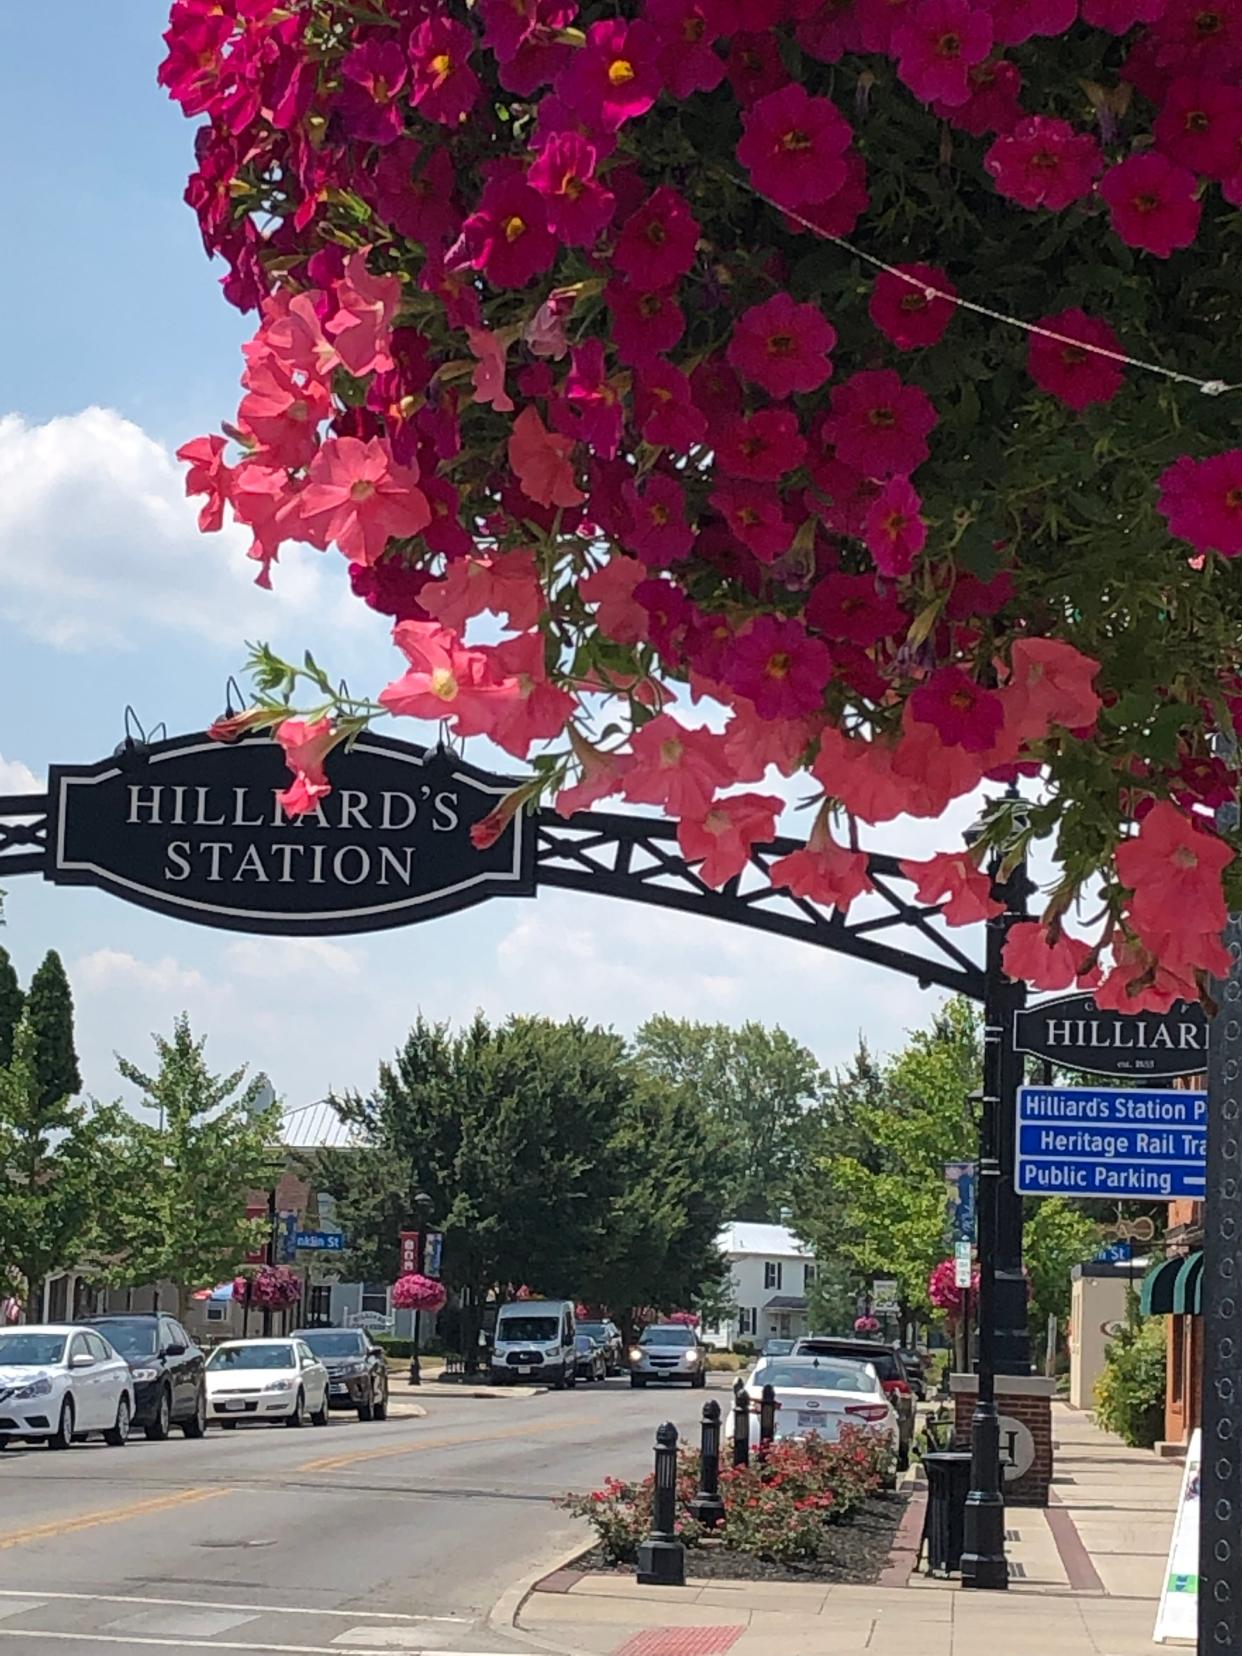 The Old Hilliard district would allow bed-and-breakfast inns and short-term rentals, such as those offered by Airbnb, according to a pending ordinance before Hilliard City Council